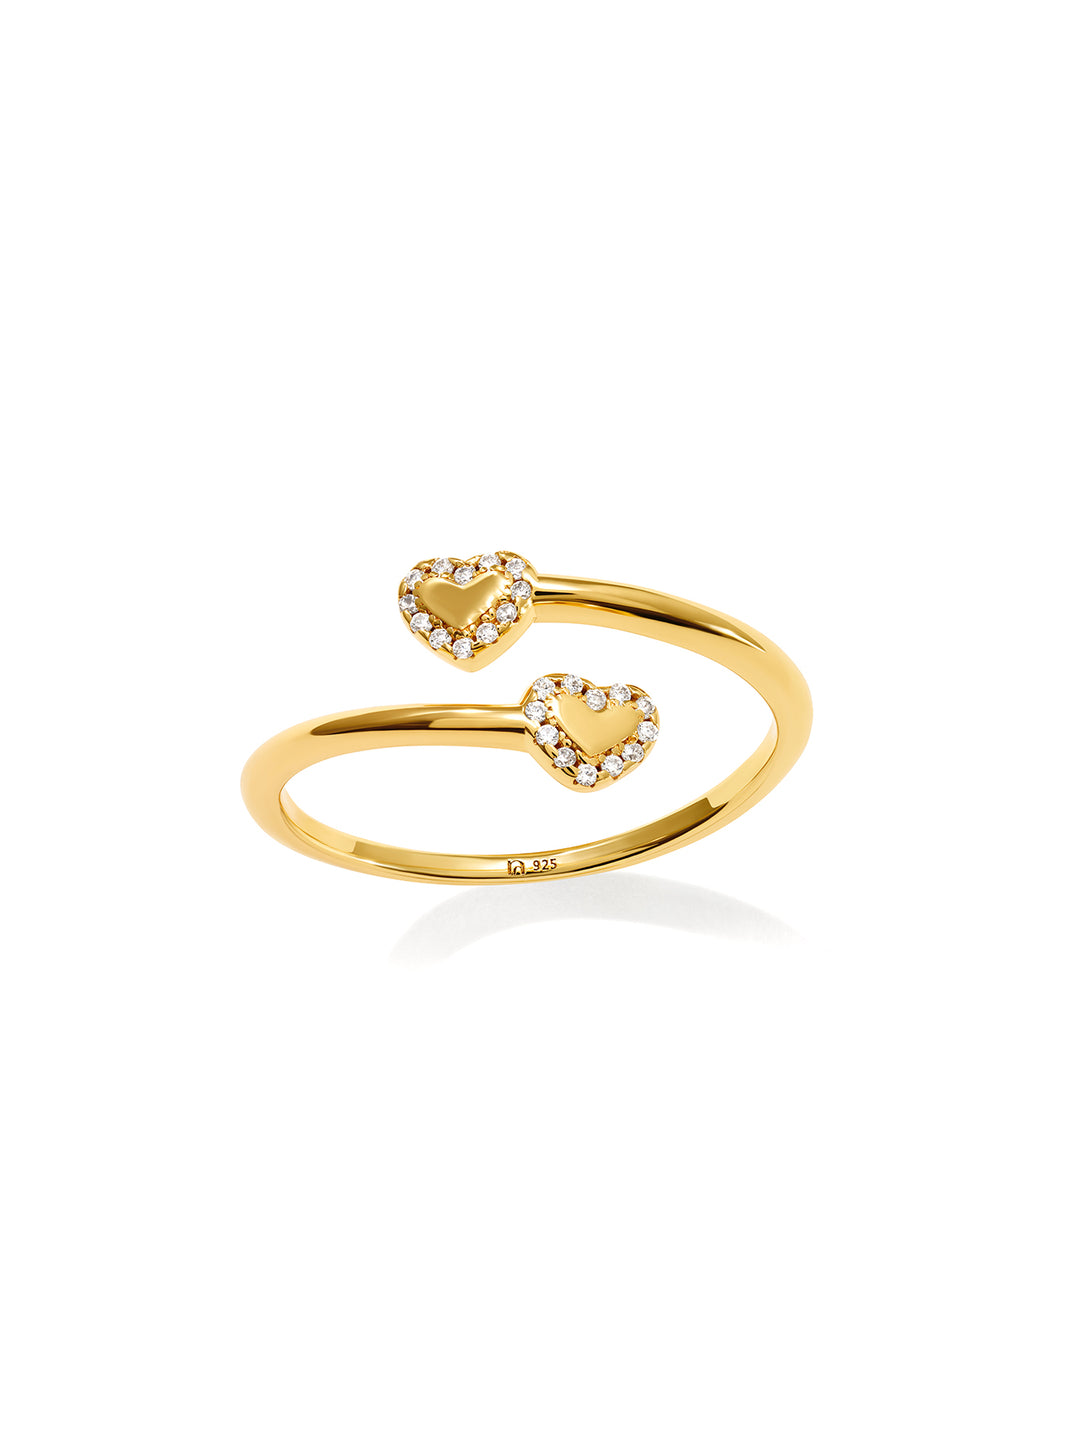 AMORE - Adjustable Ring • Color: 18K Yellow Gold